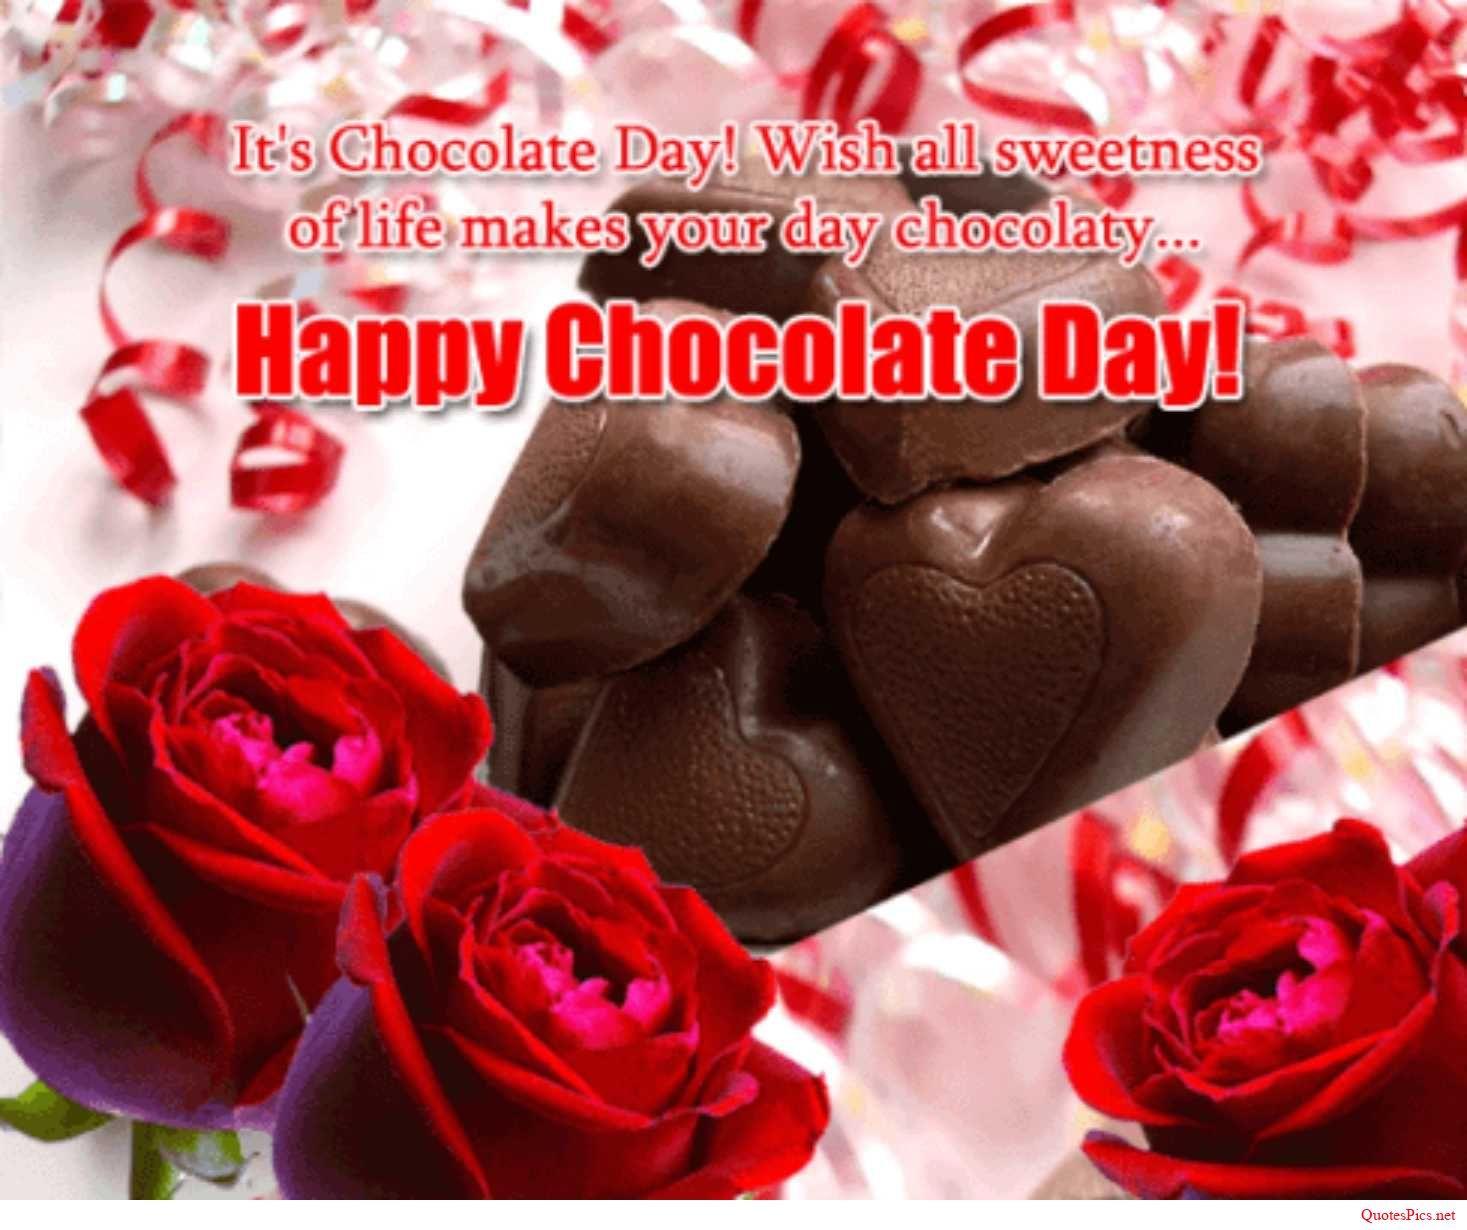 Chocolate Day Wallpapers - Wallpaper Cave